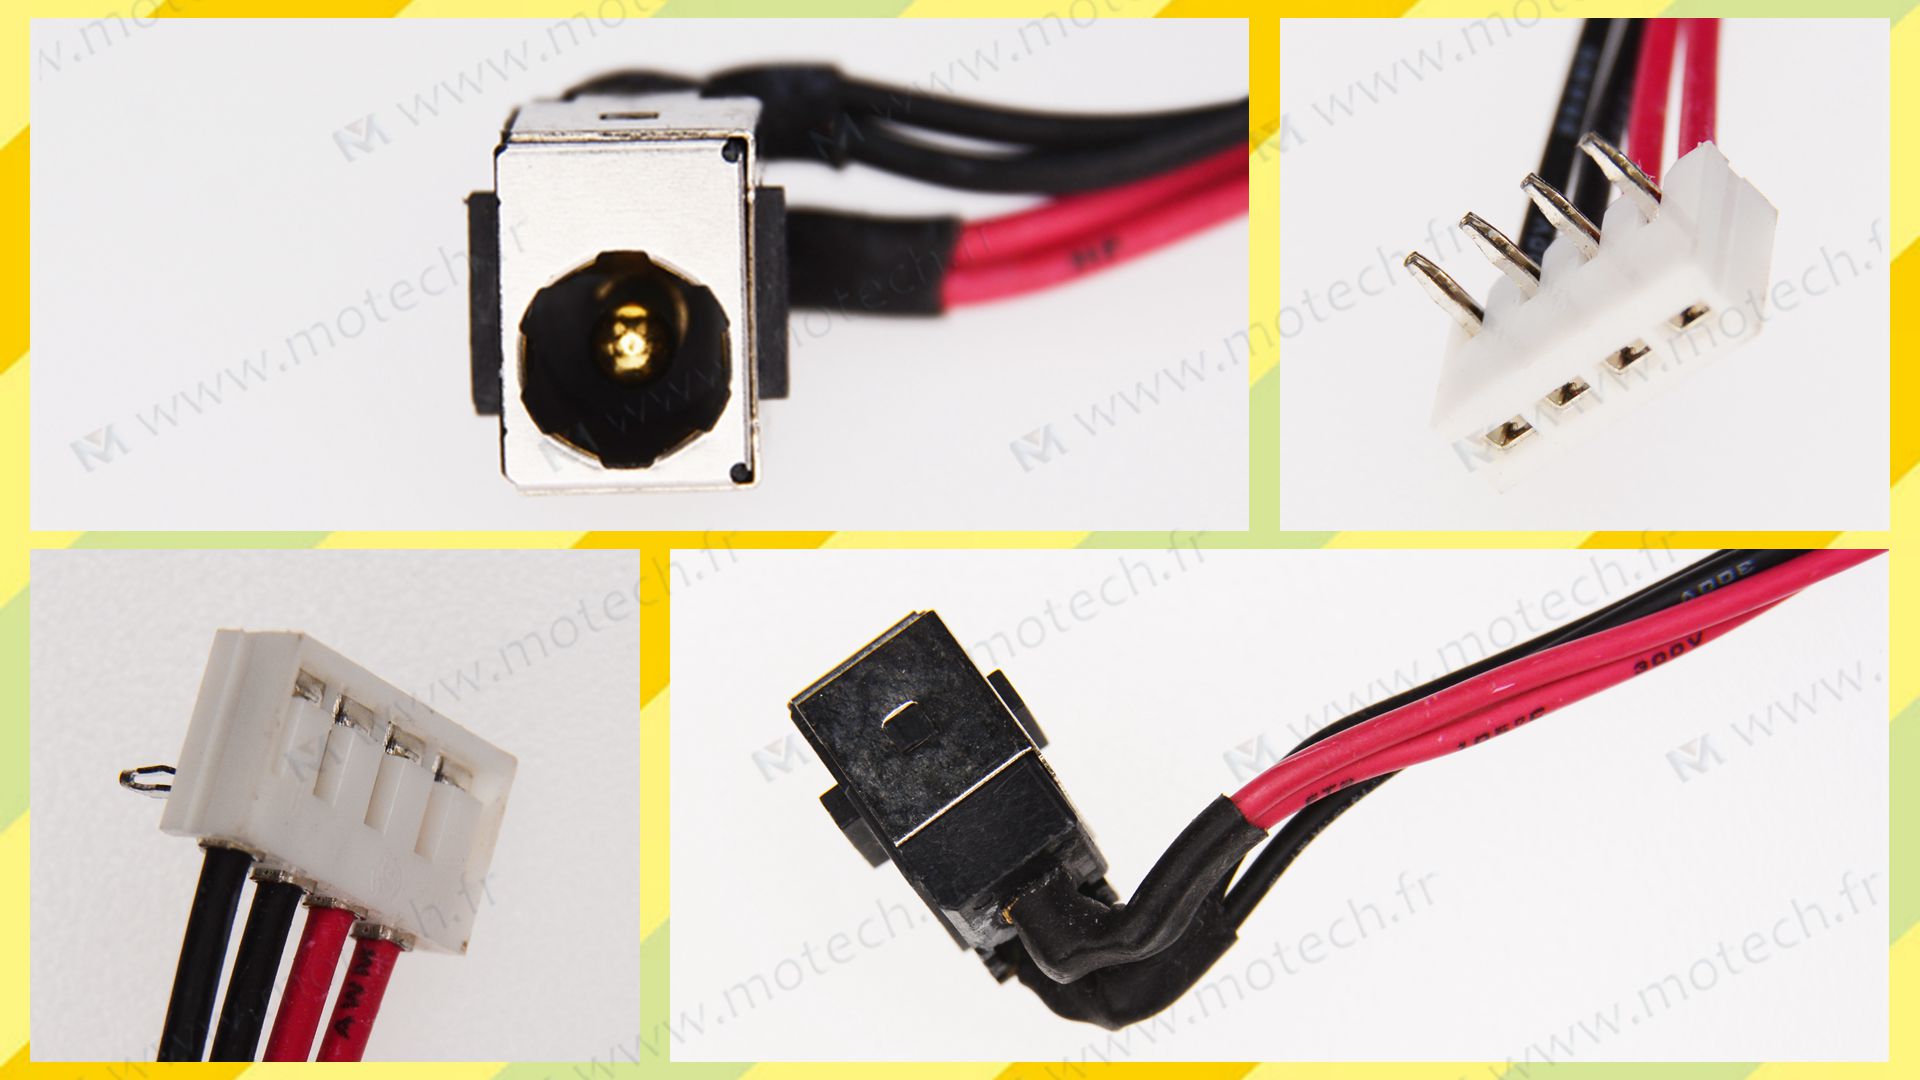 Toshiba A500 charging connector, Toshiba A500 DC Power Jack, Toshiba A500 DC IN Cable, Toshiba A500 Power Jack, Toshiba A500 plug, Toshiba A500 Jack socket, Toshiba A500 connecteur de charge, 